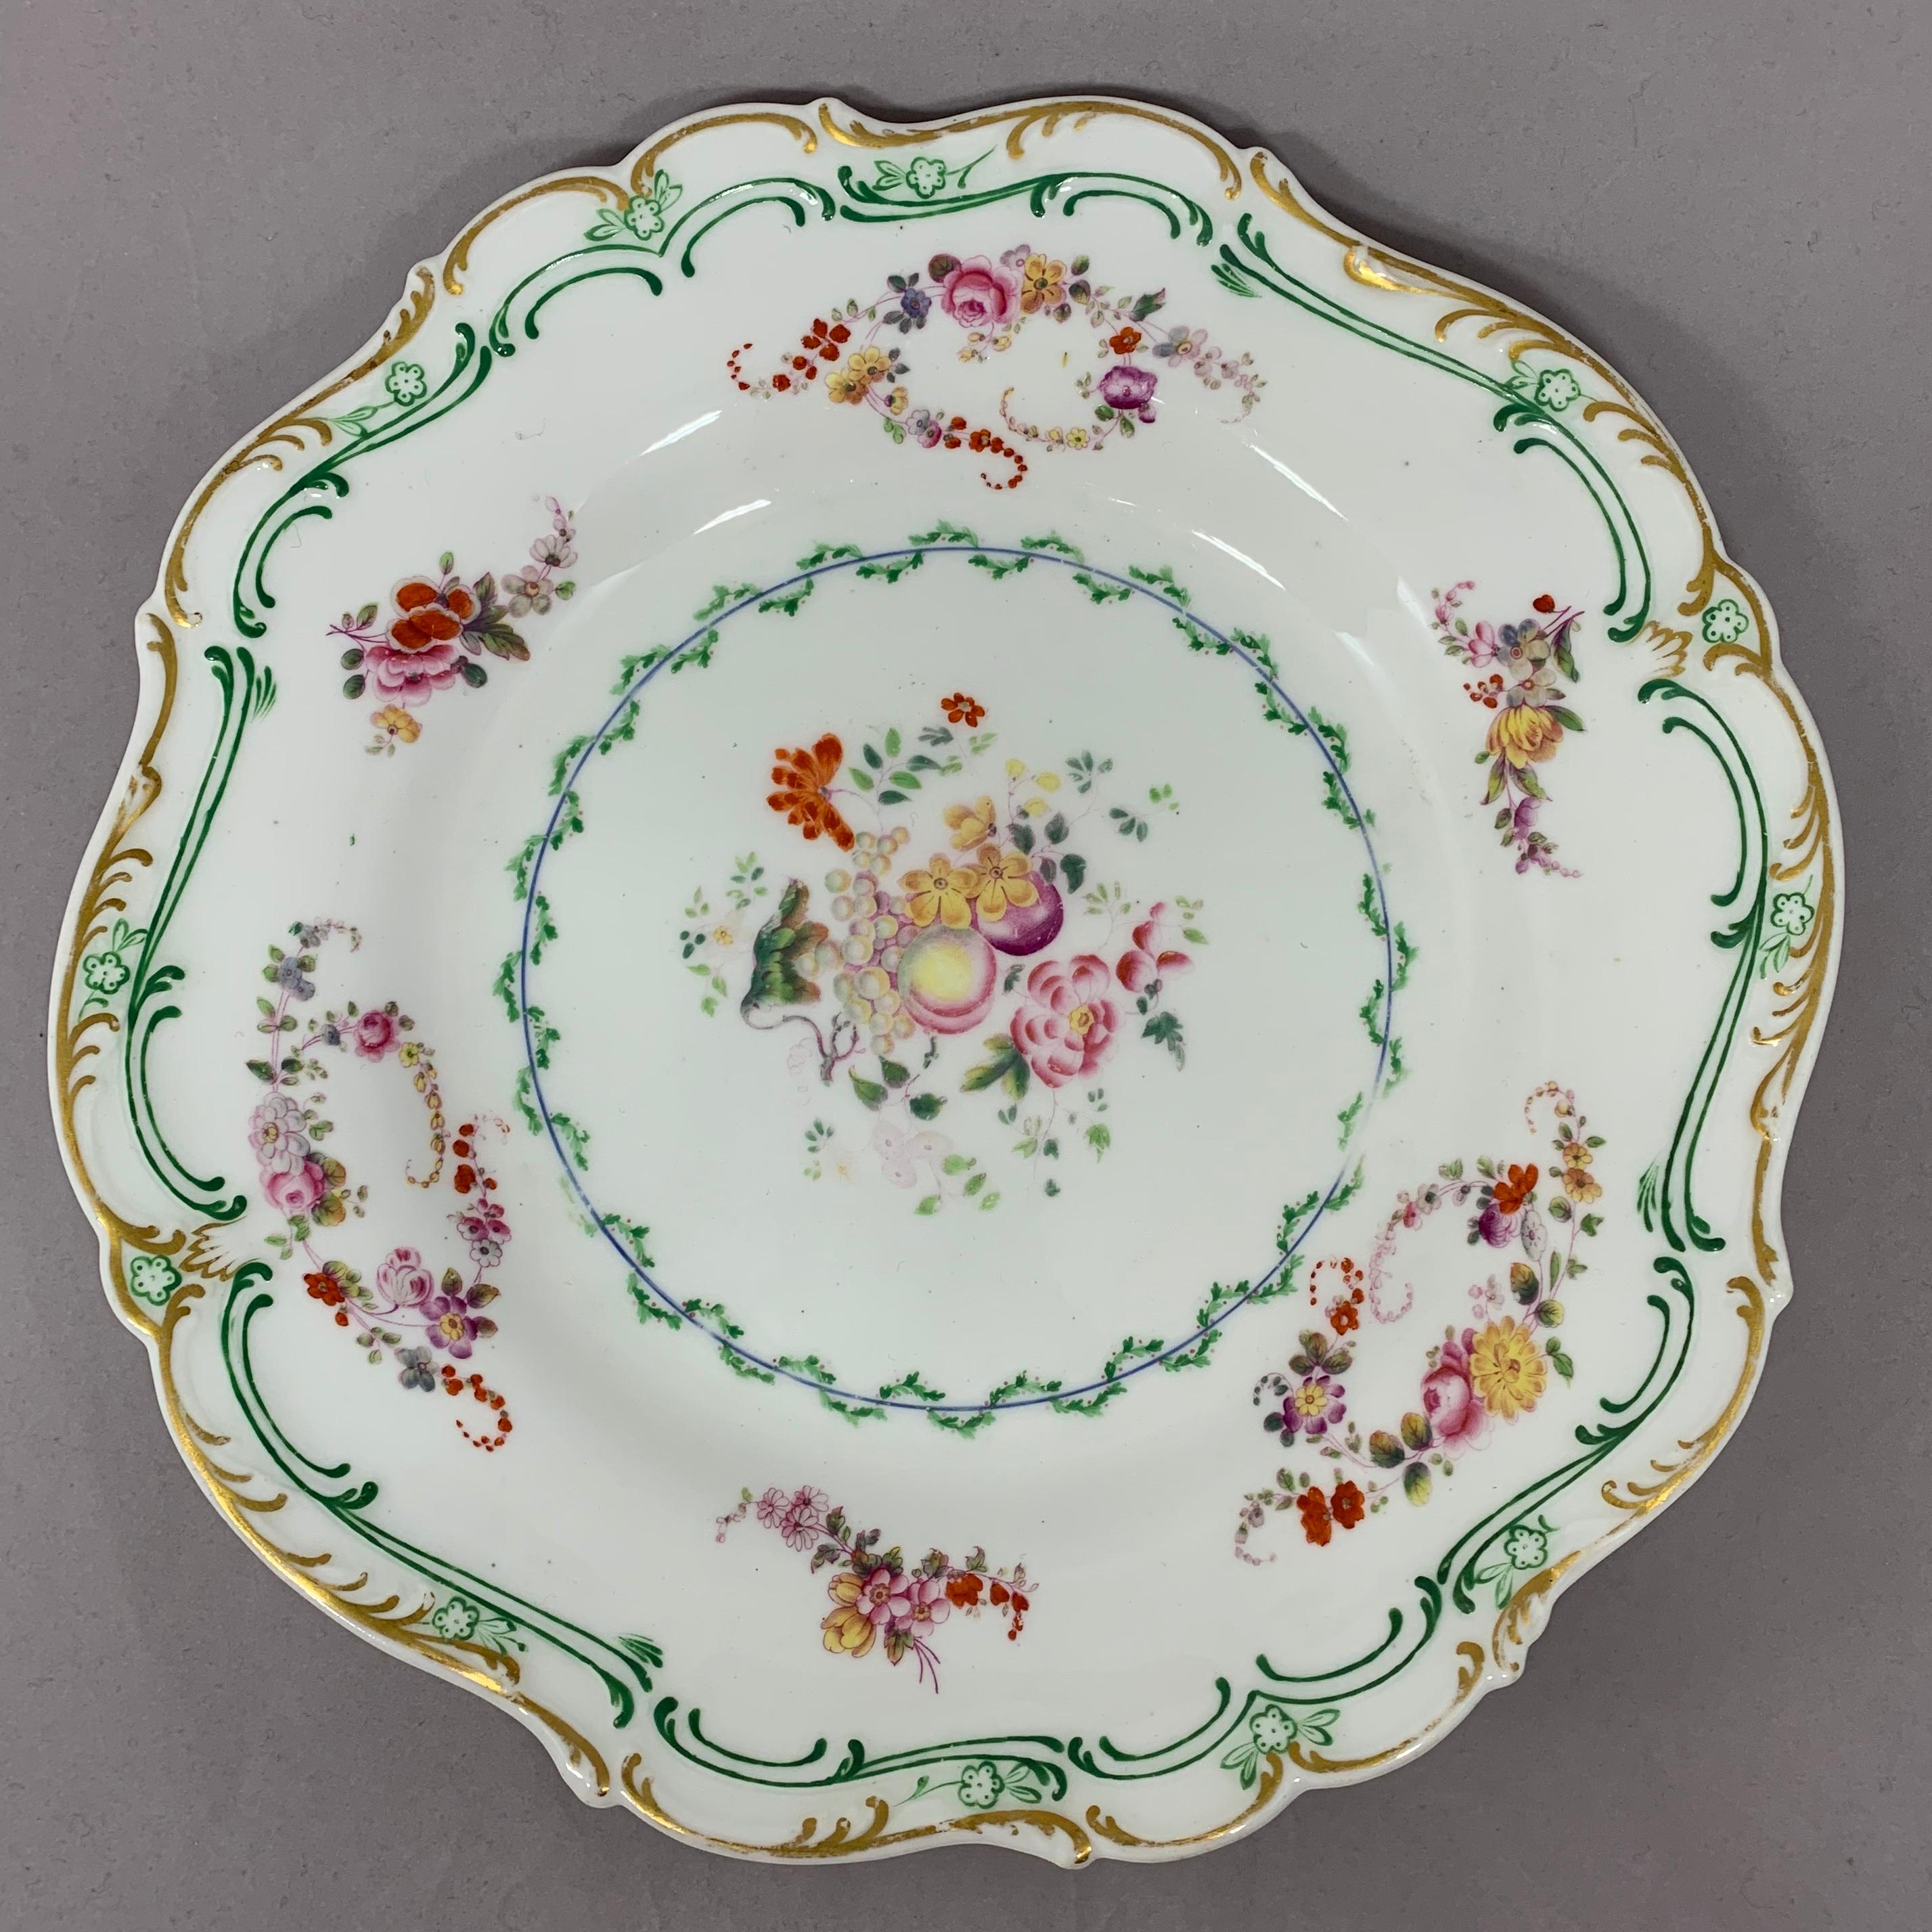 Set of eight green and gilt banded floral plates. Hand painted plates with floral swags and fruits with gilt rim. England, circa 1840s
Dimensions: 9